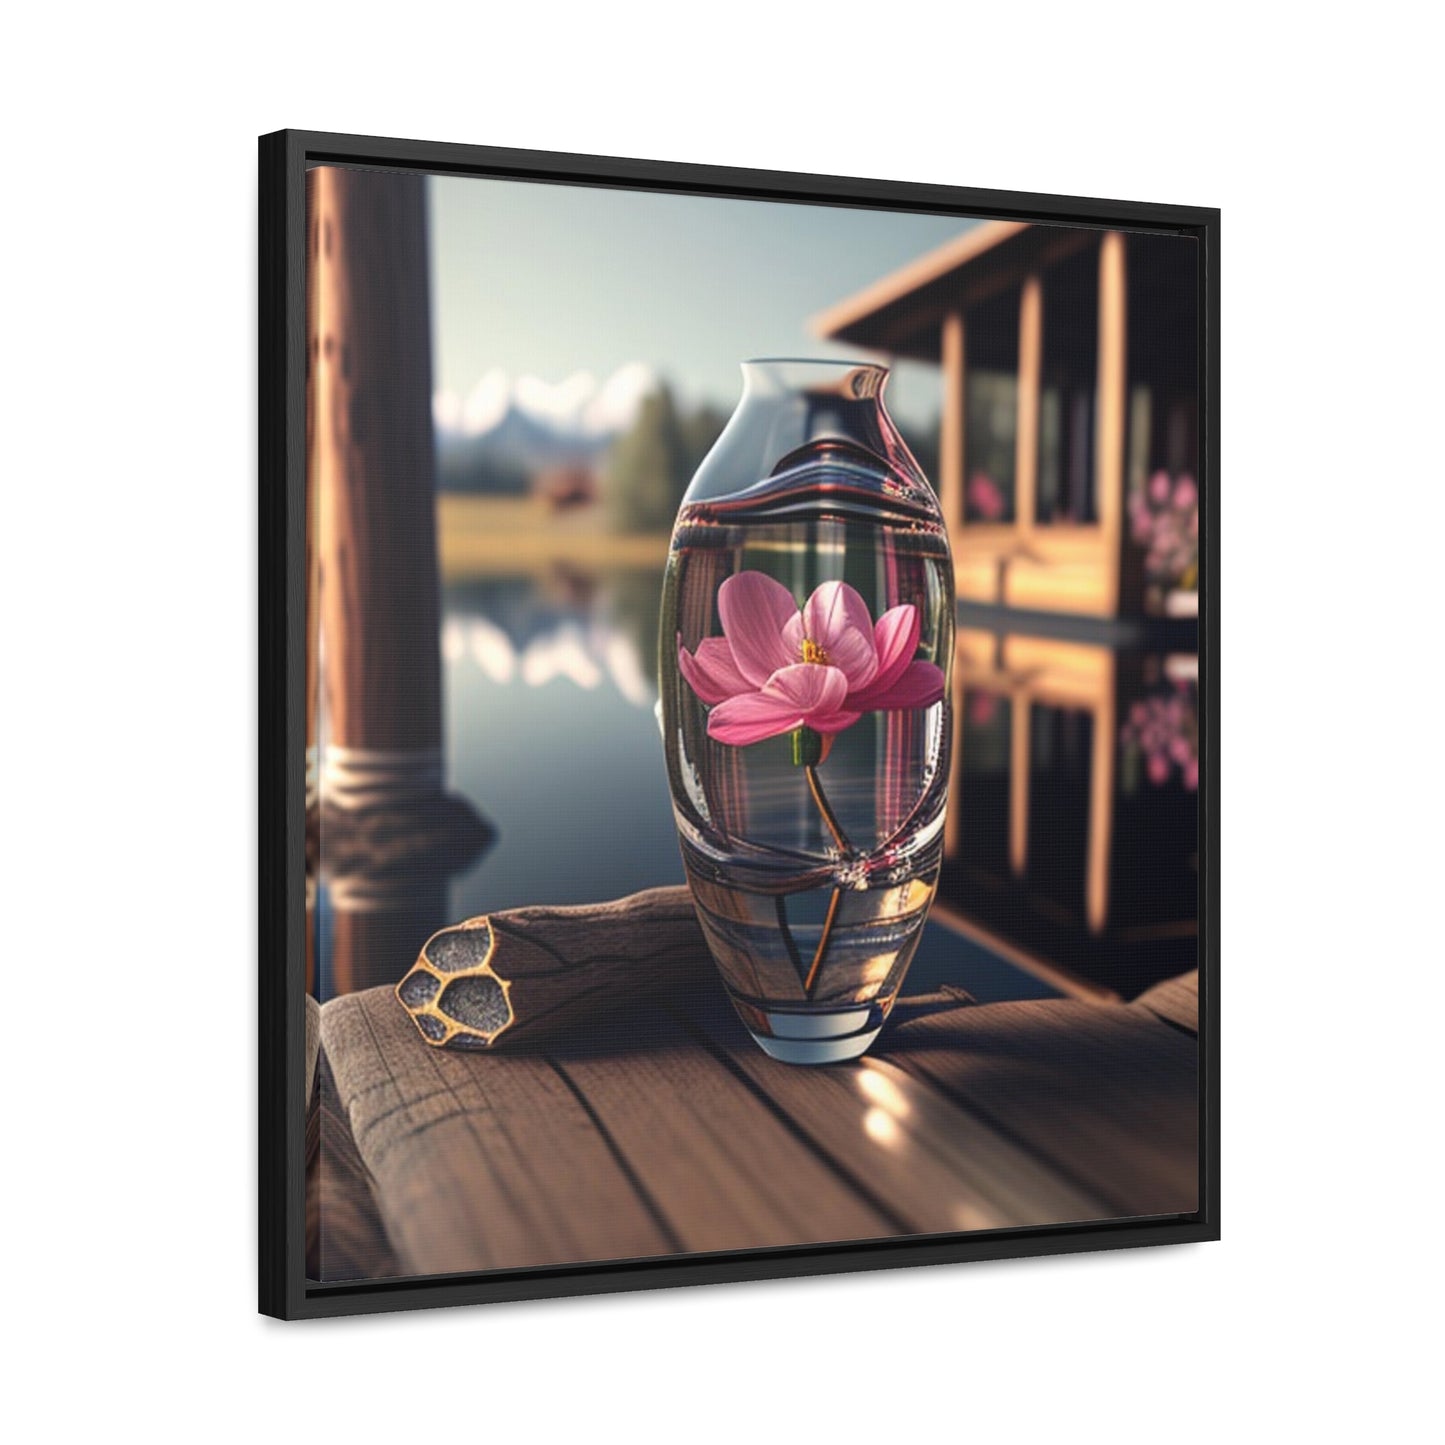 Gallery Canvas Wraps, Square Frame Pink Magnolia 2